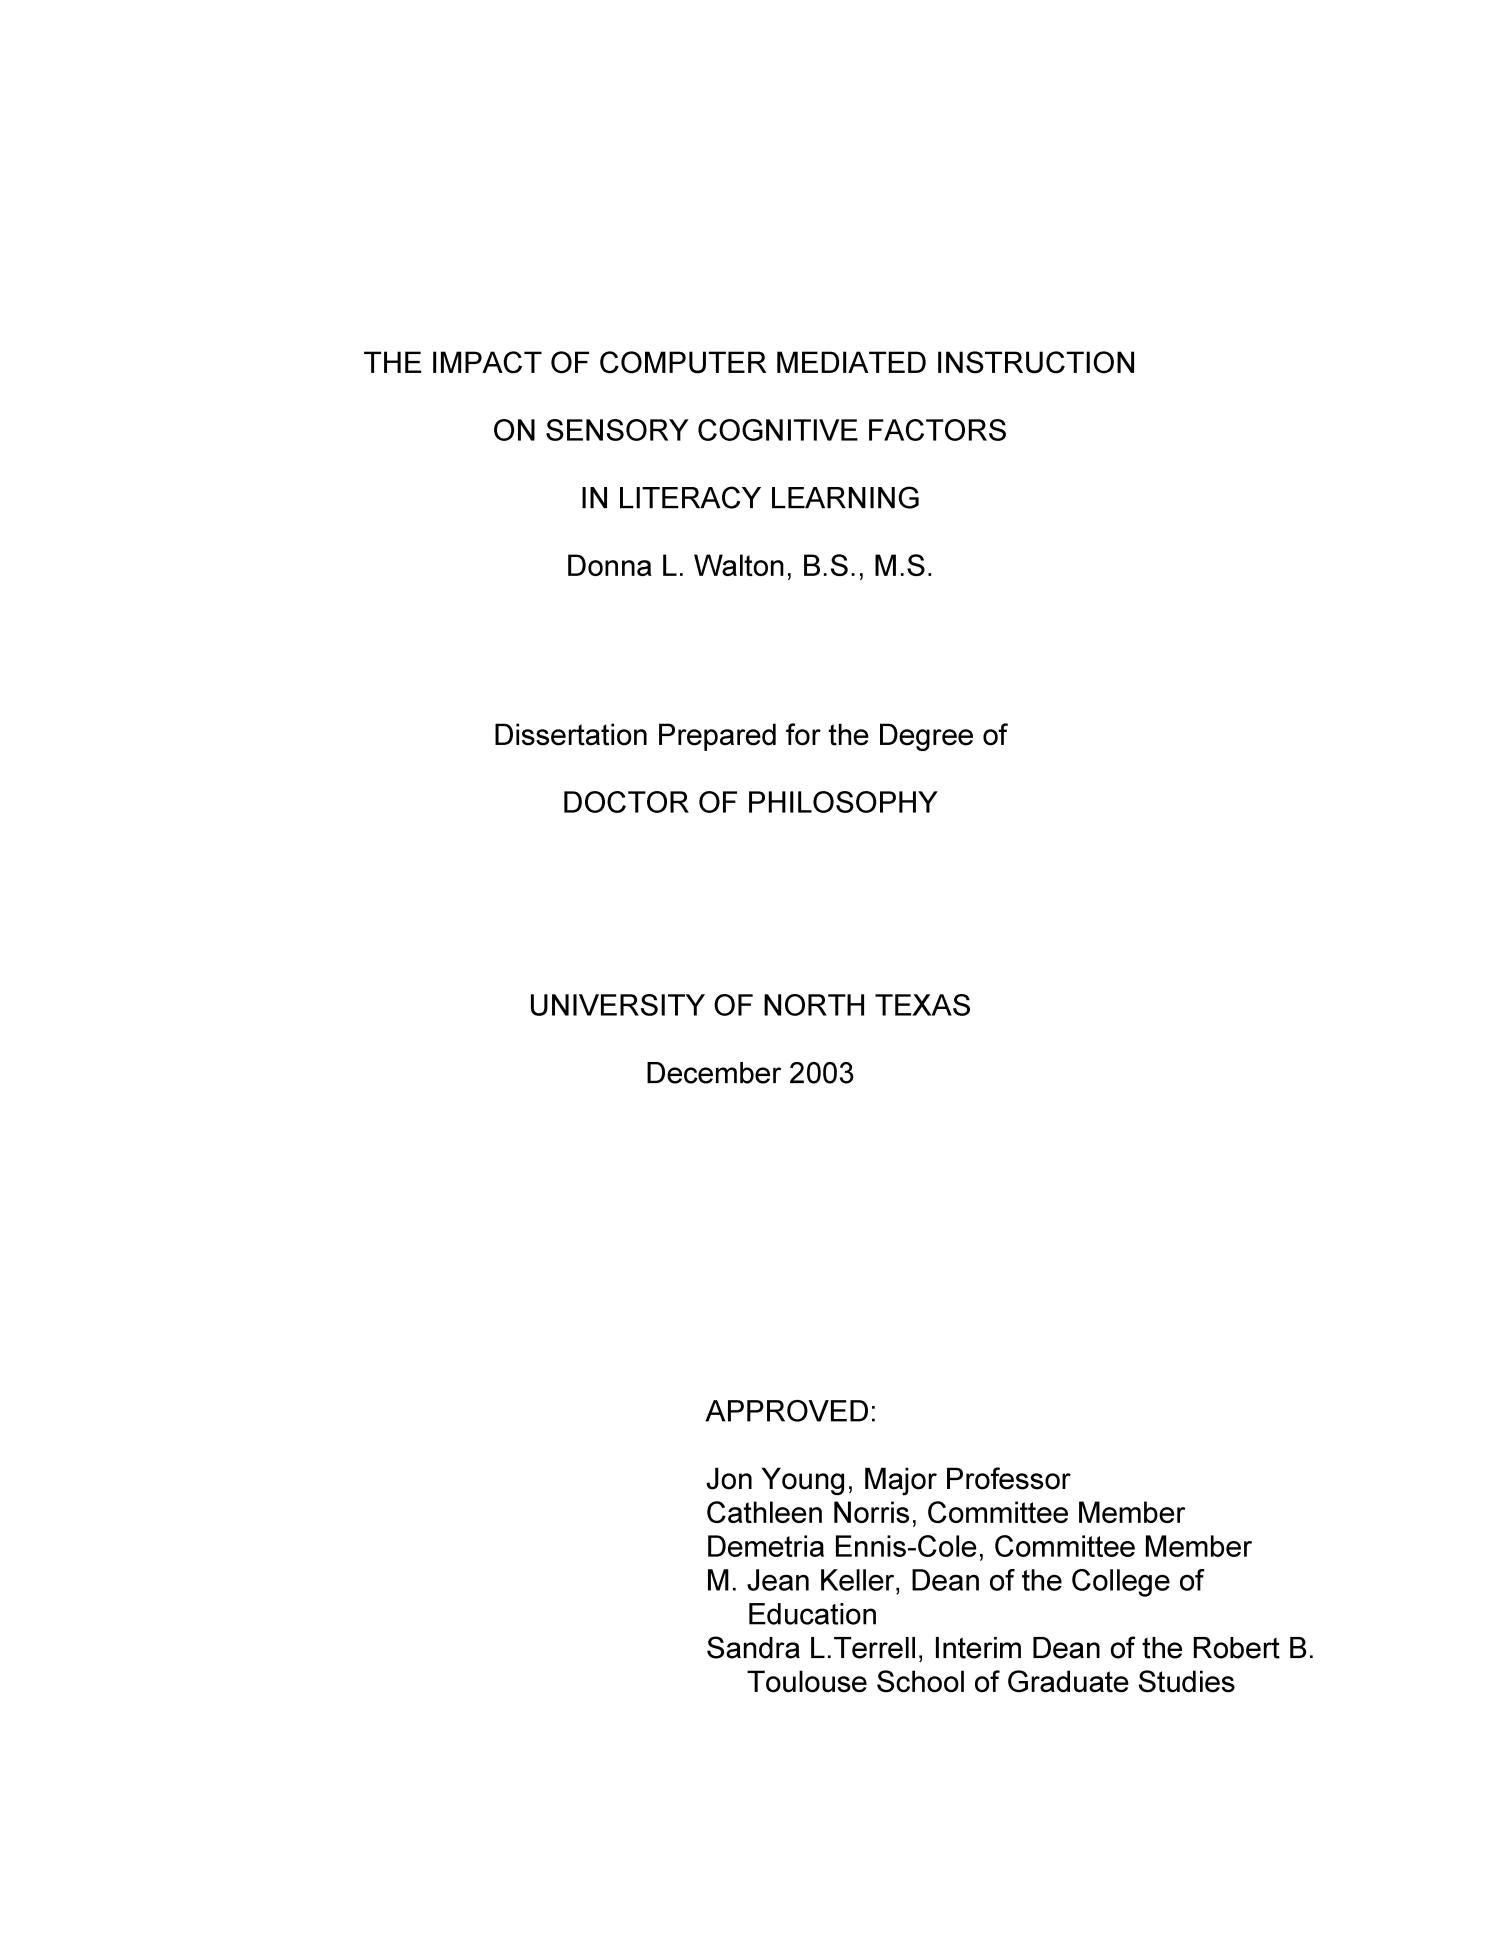 The impact of computer assisted instruction on sensory cognitive factors in literacy learning.
                                                
                                                    Title Page
                                                